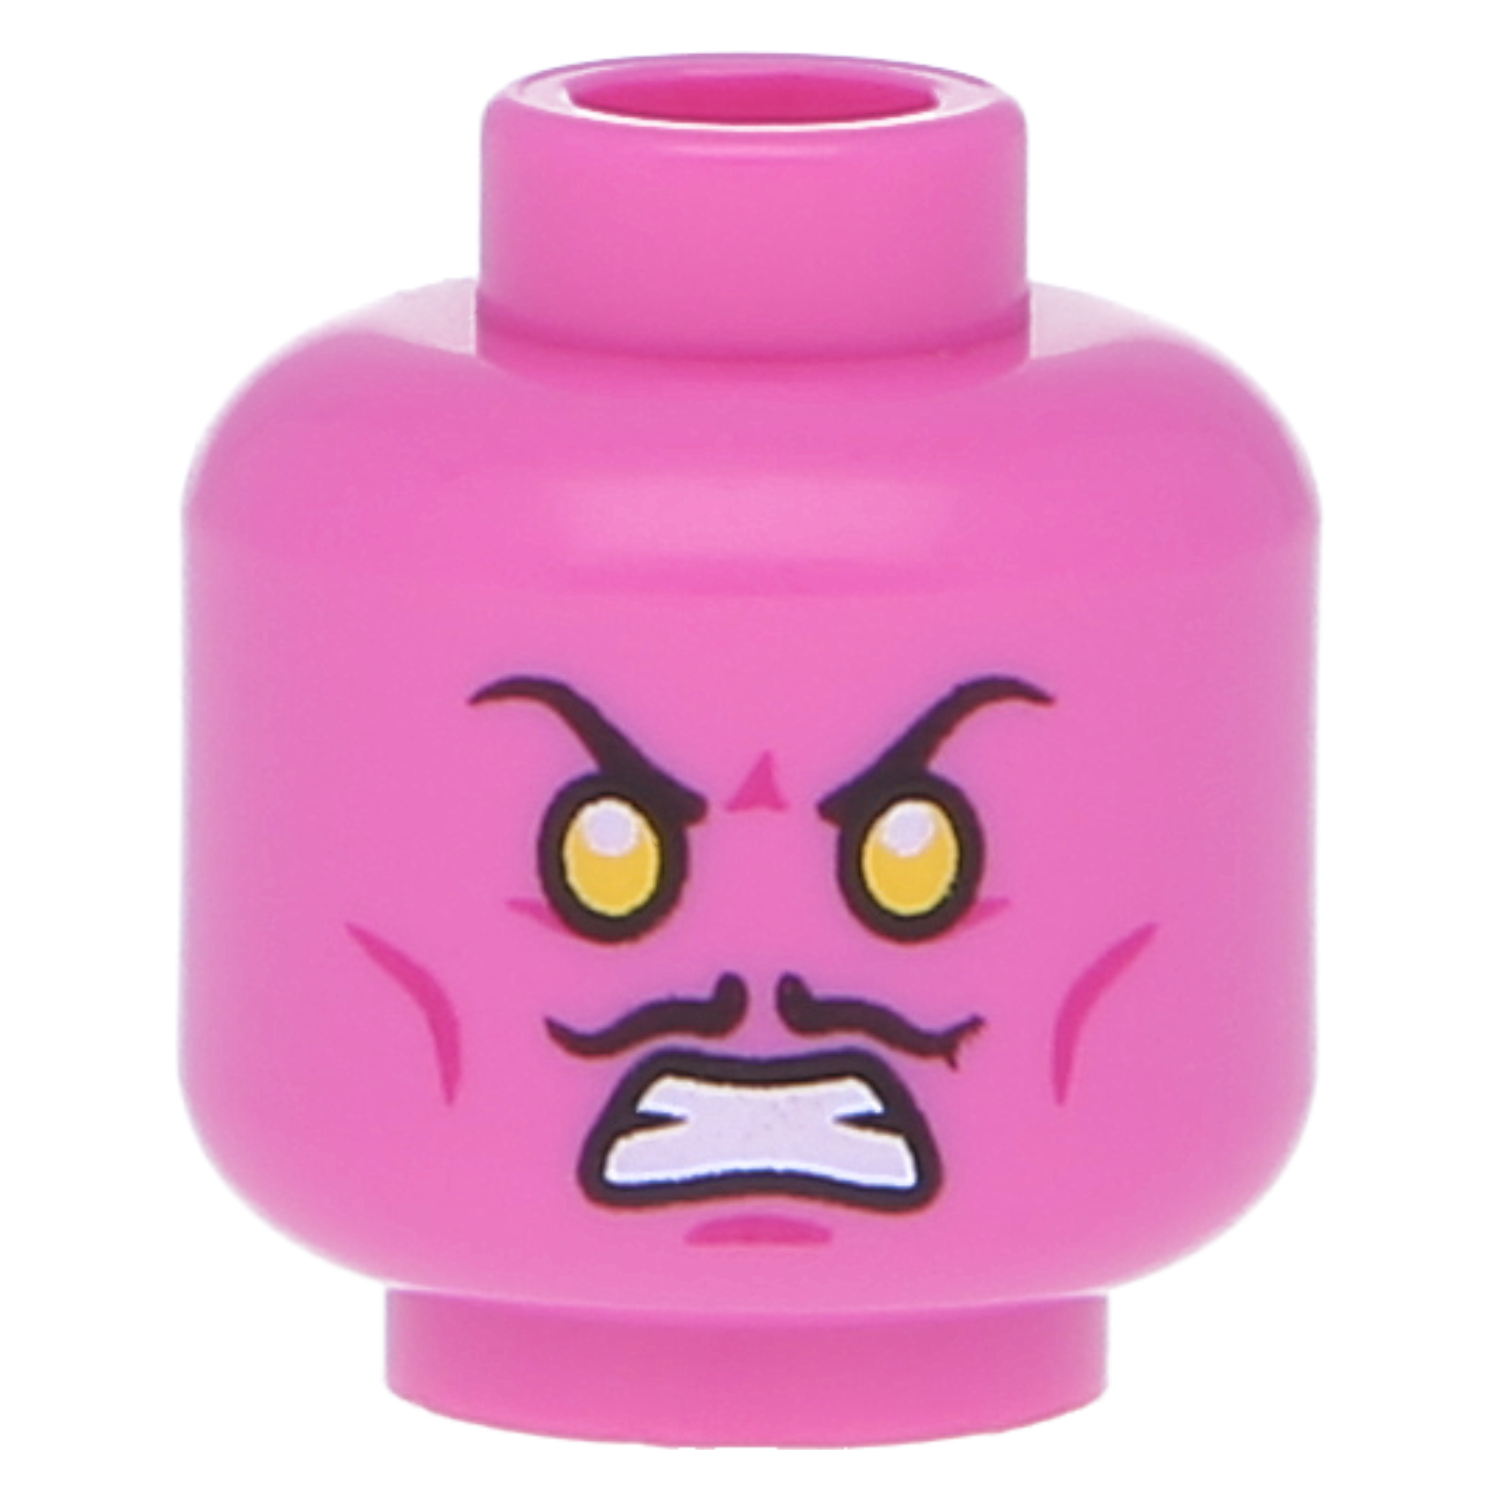 LEGO Minifigures heads (other) - dark pink head double -sided with mustache, orange eyes and frowns/ grown teeth (in -depth nub)